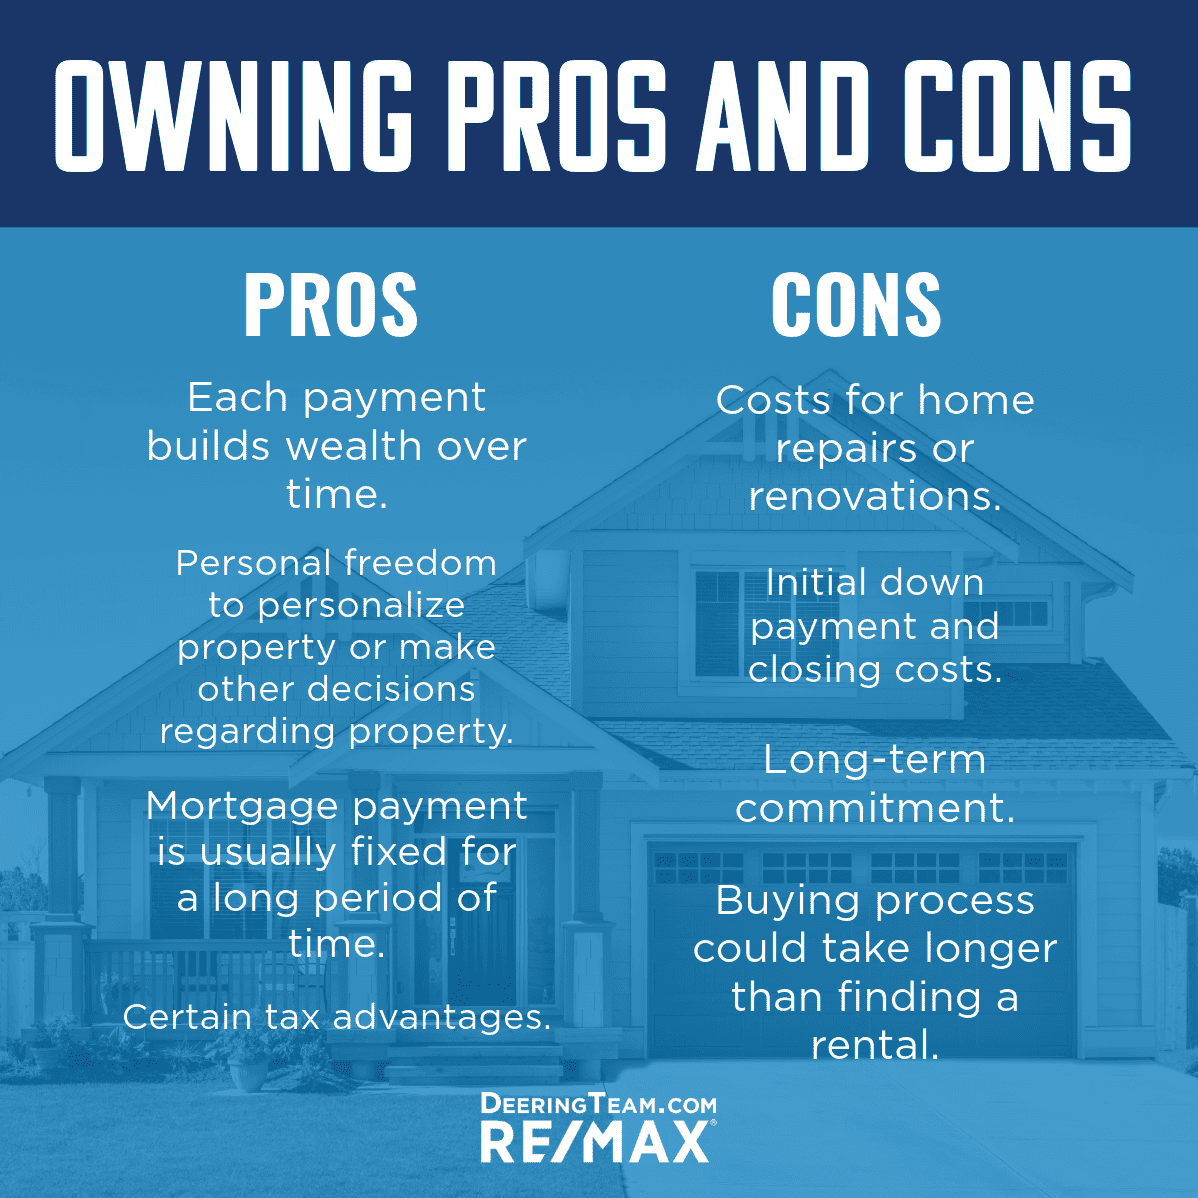 Owning a home Pros and cons